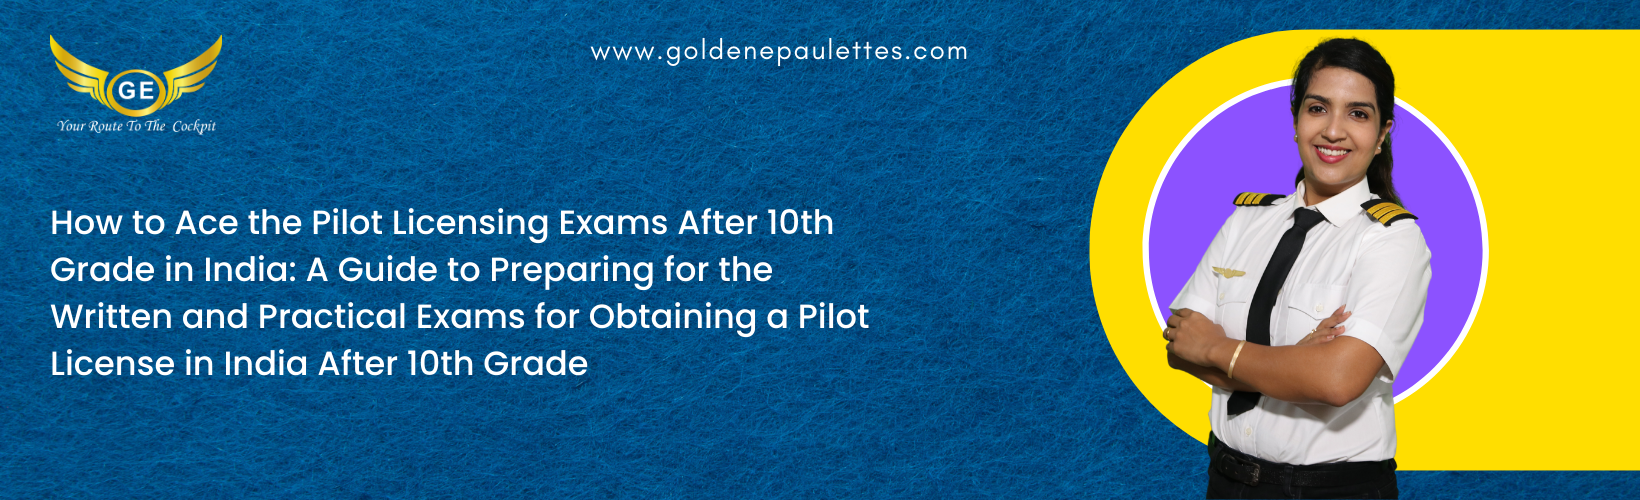 How to Prepare for the Pilot Licensing Exams After 10th Grade in India